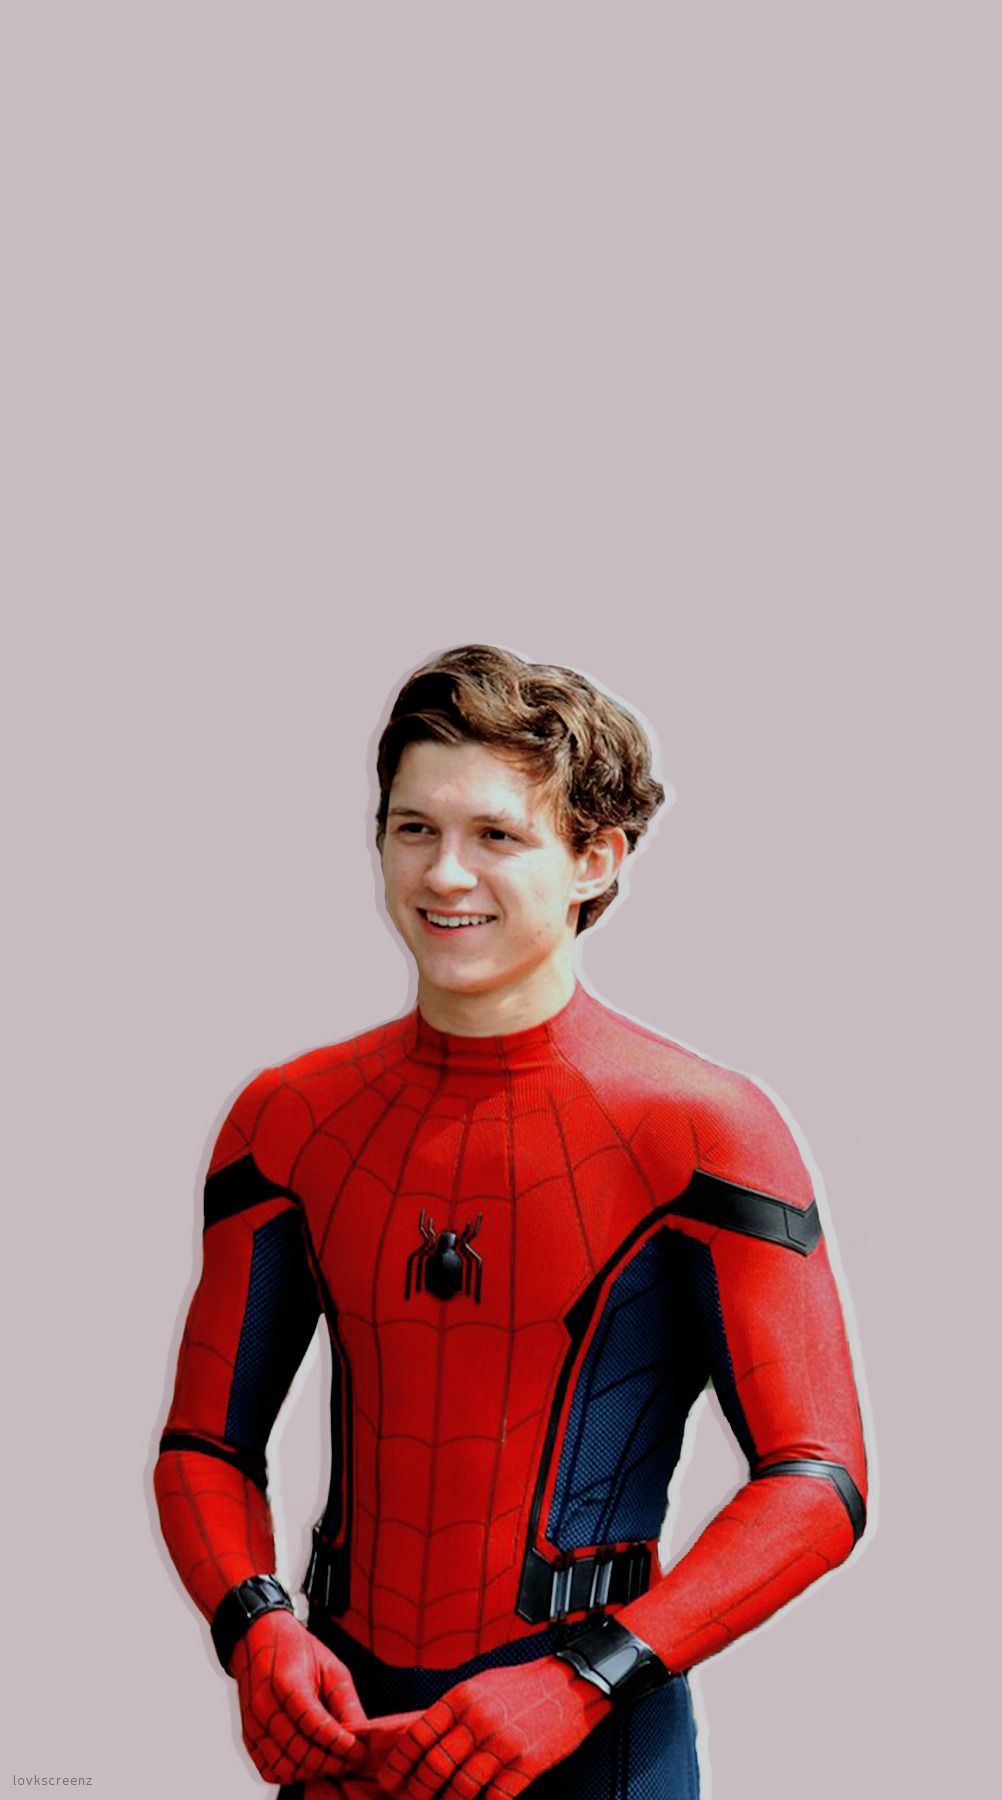 Top tom holland spiderman wallpaper iphone HD Download Book Source for free download HD, 4K & high quality wallpaper